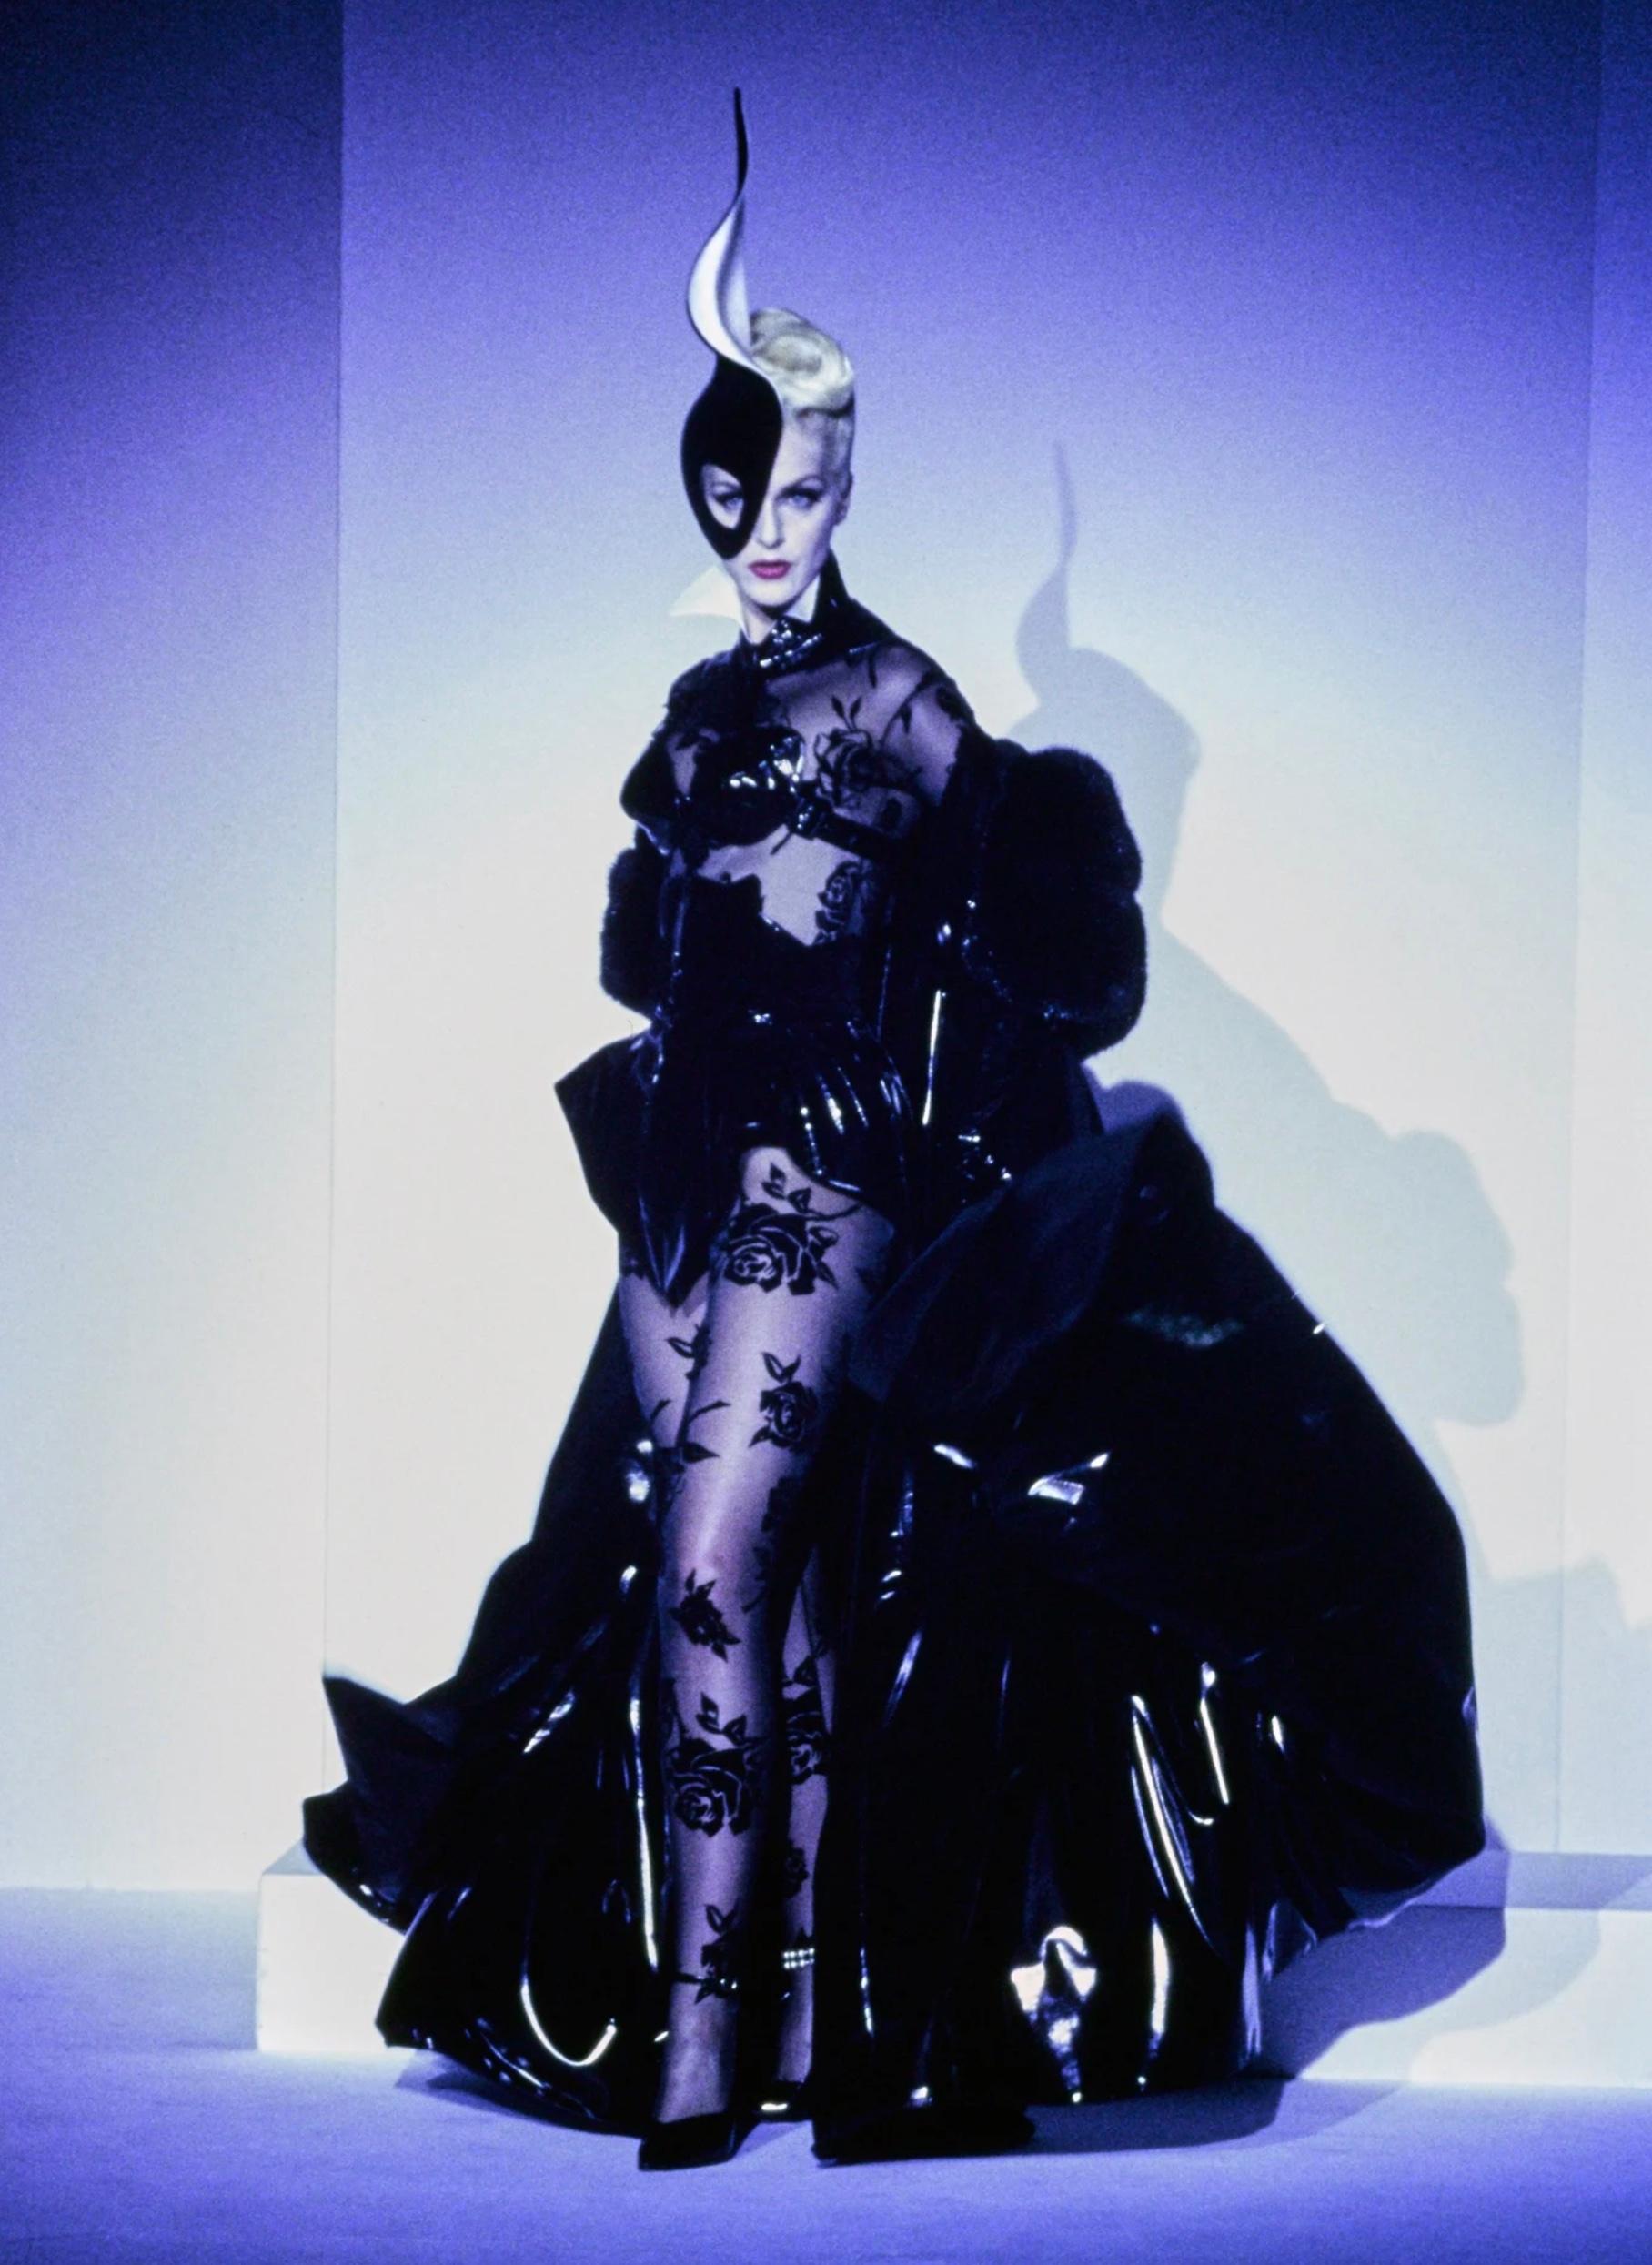 Iconic Thierry mugler corset, Fall Winter Collection 1995.
Worn on the legendary Runwayall show by Simonetta Gianfelici and is part of the Mugler Couturissime Exhibition.
Shiny black vinyl peplum corset with dramatic exaggerated hips. Closes with